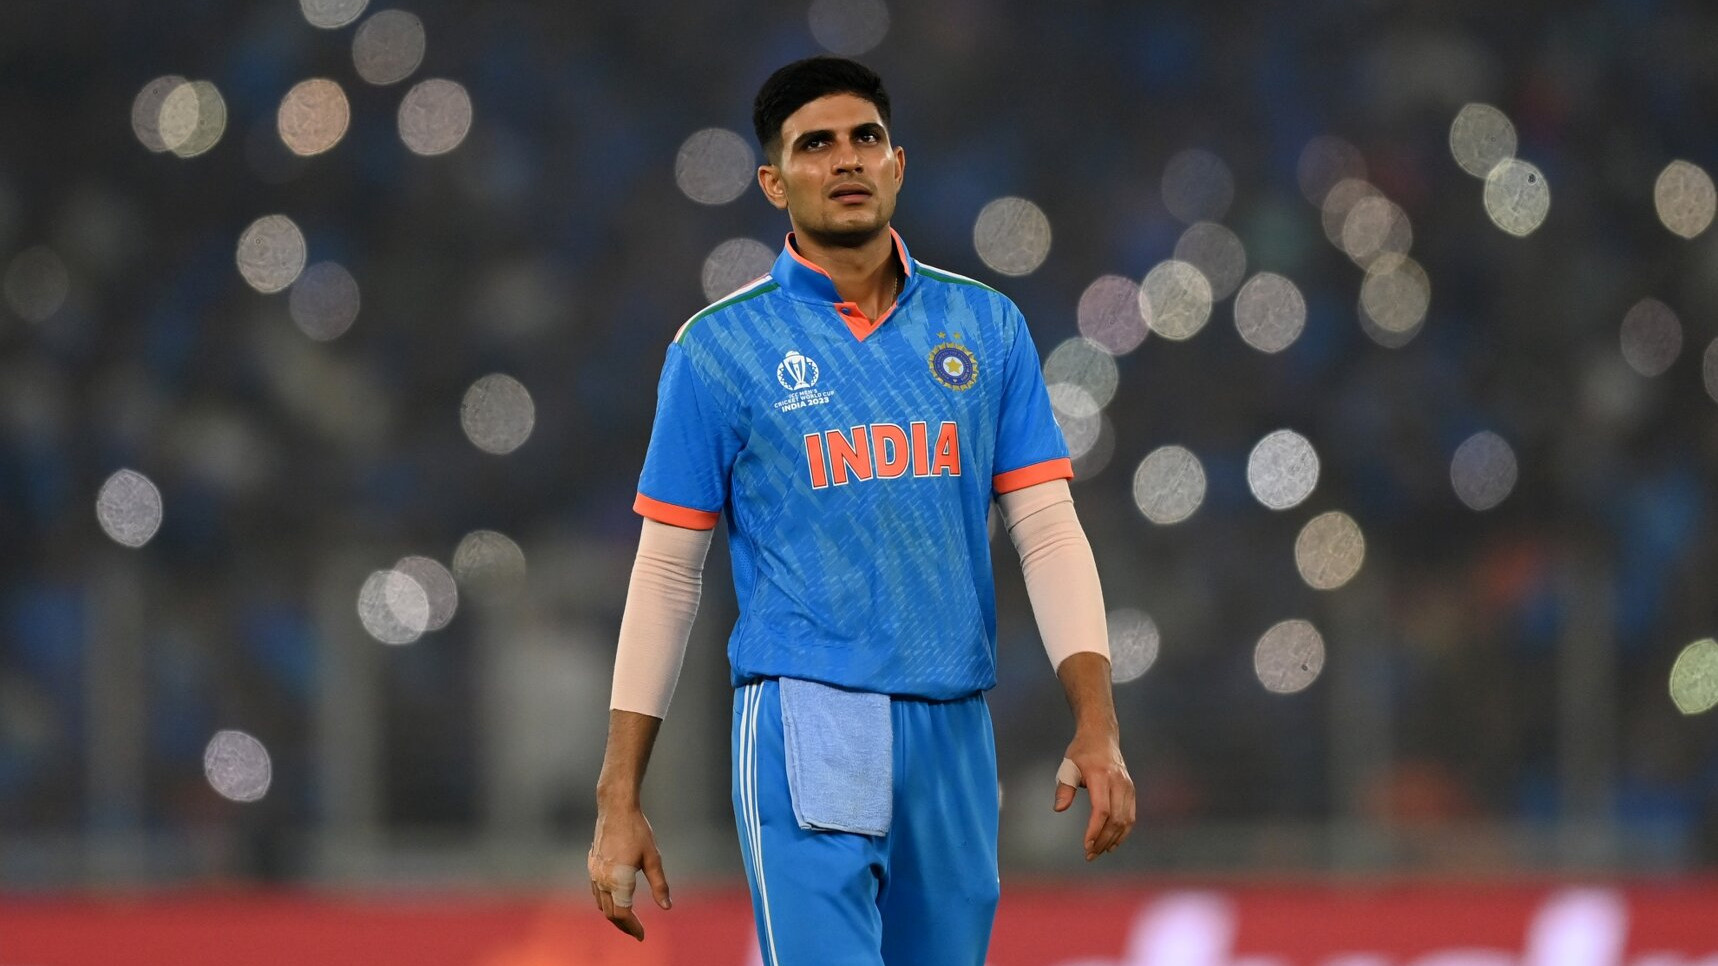 Shubman Gill likely to be named captain of Team India for tour of Zimbabwe- Reports